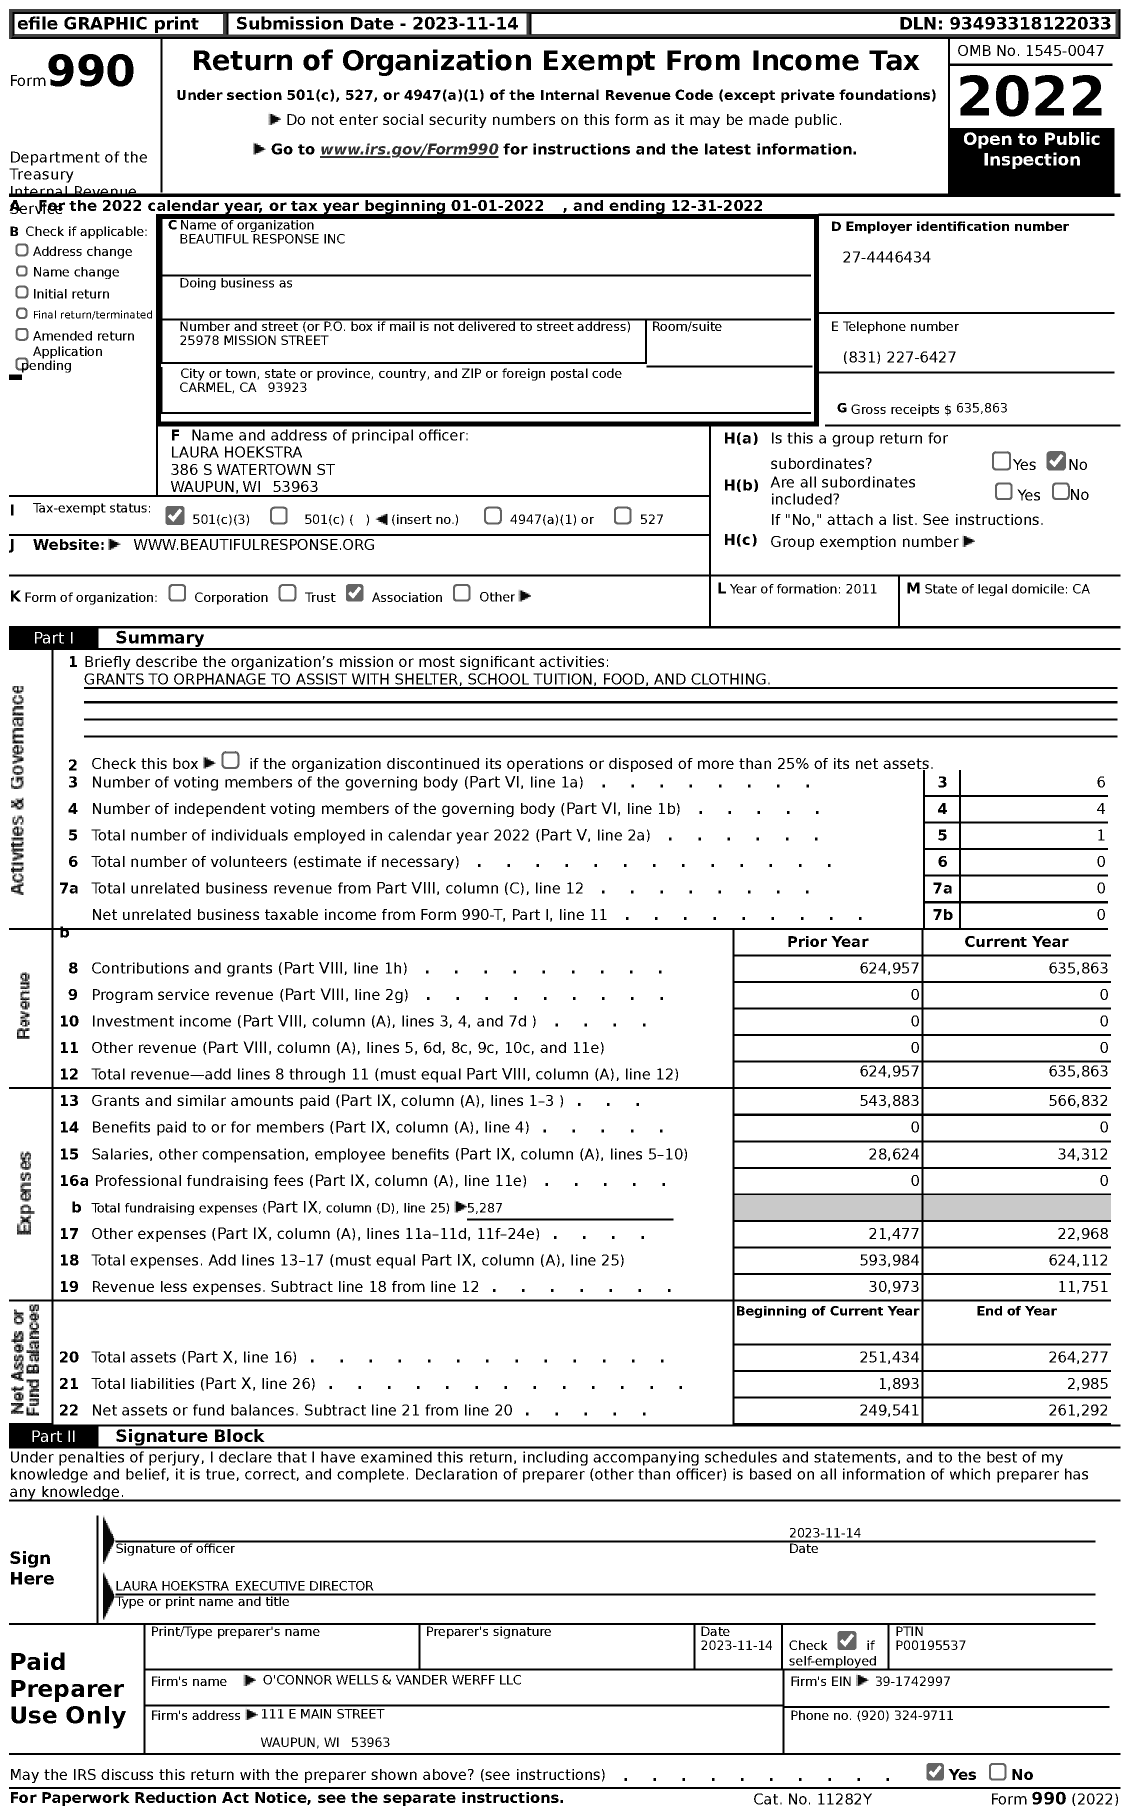 Image of first page of 2022 Form 990 for Beautiful Response